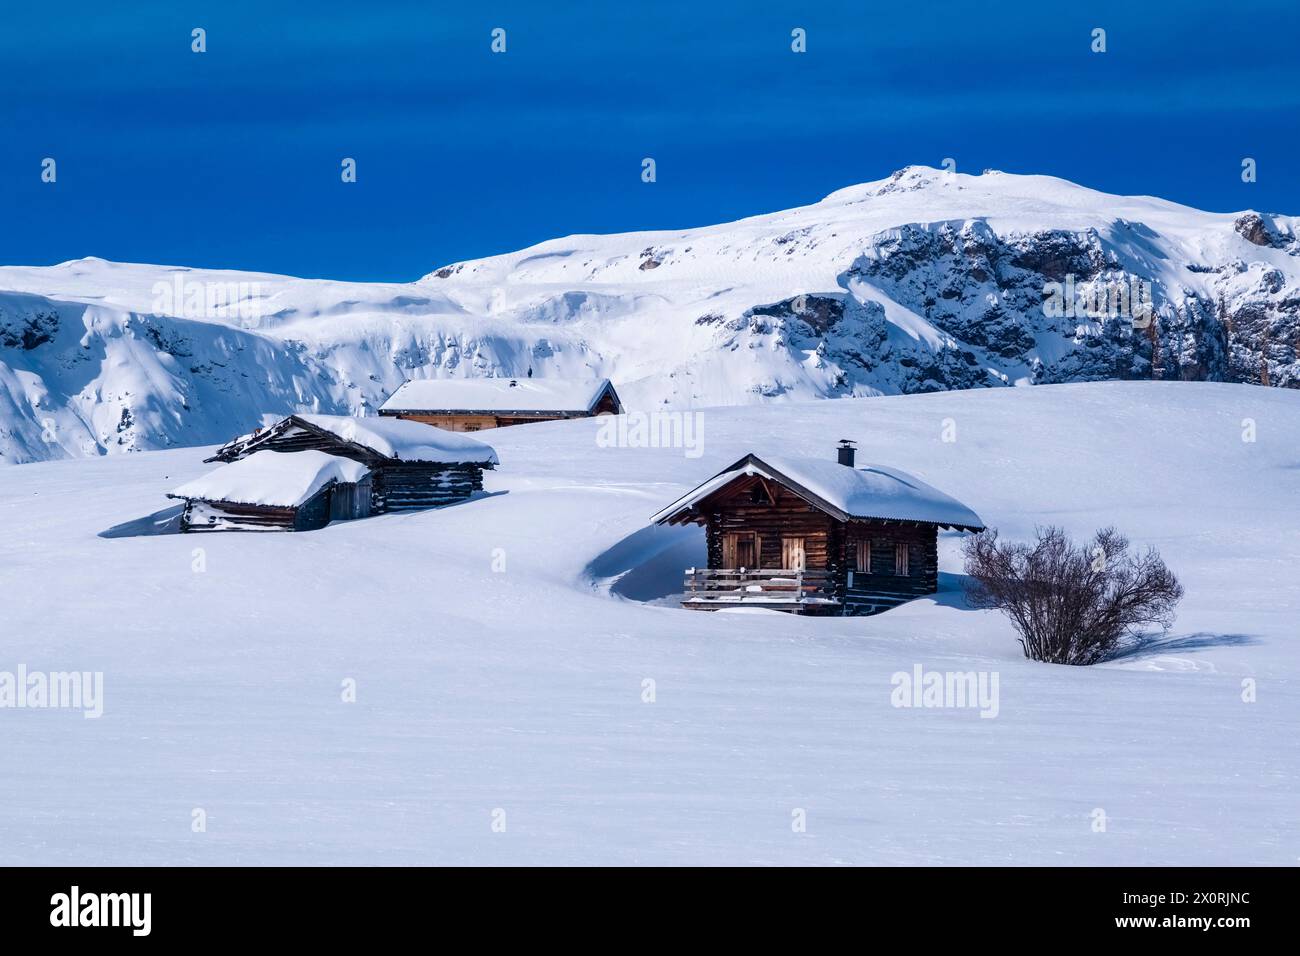 Hilly agricultural countryside with snow-covered pastures, bushes and wooden huts at Seiser Alm in winter, summit of Cima di Terrarossa in the distanc Stock Photo